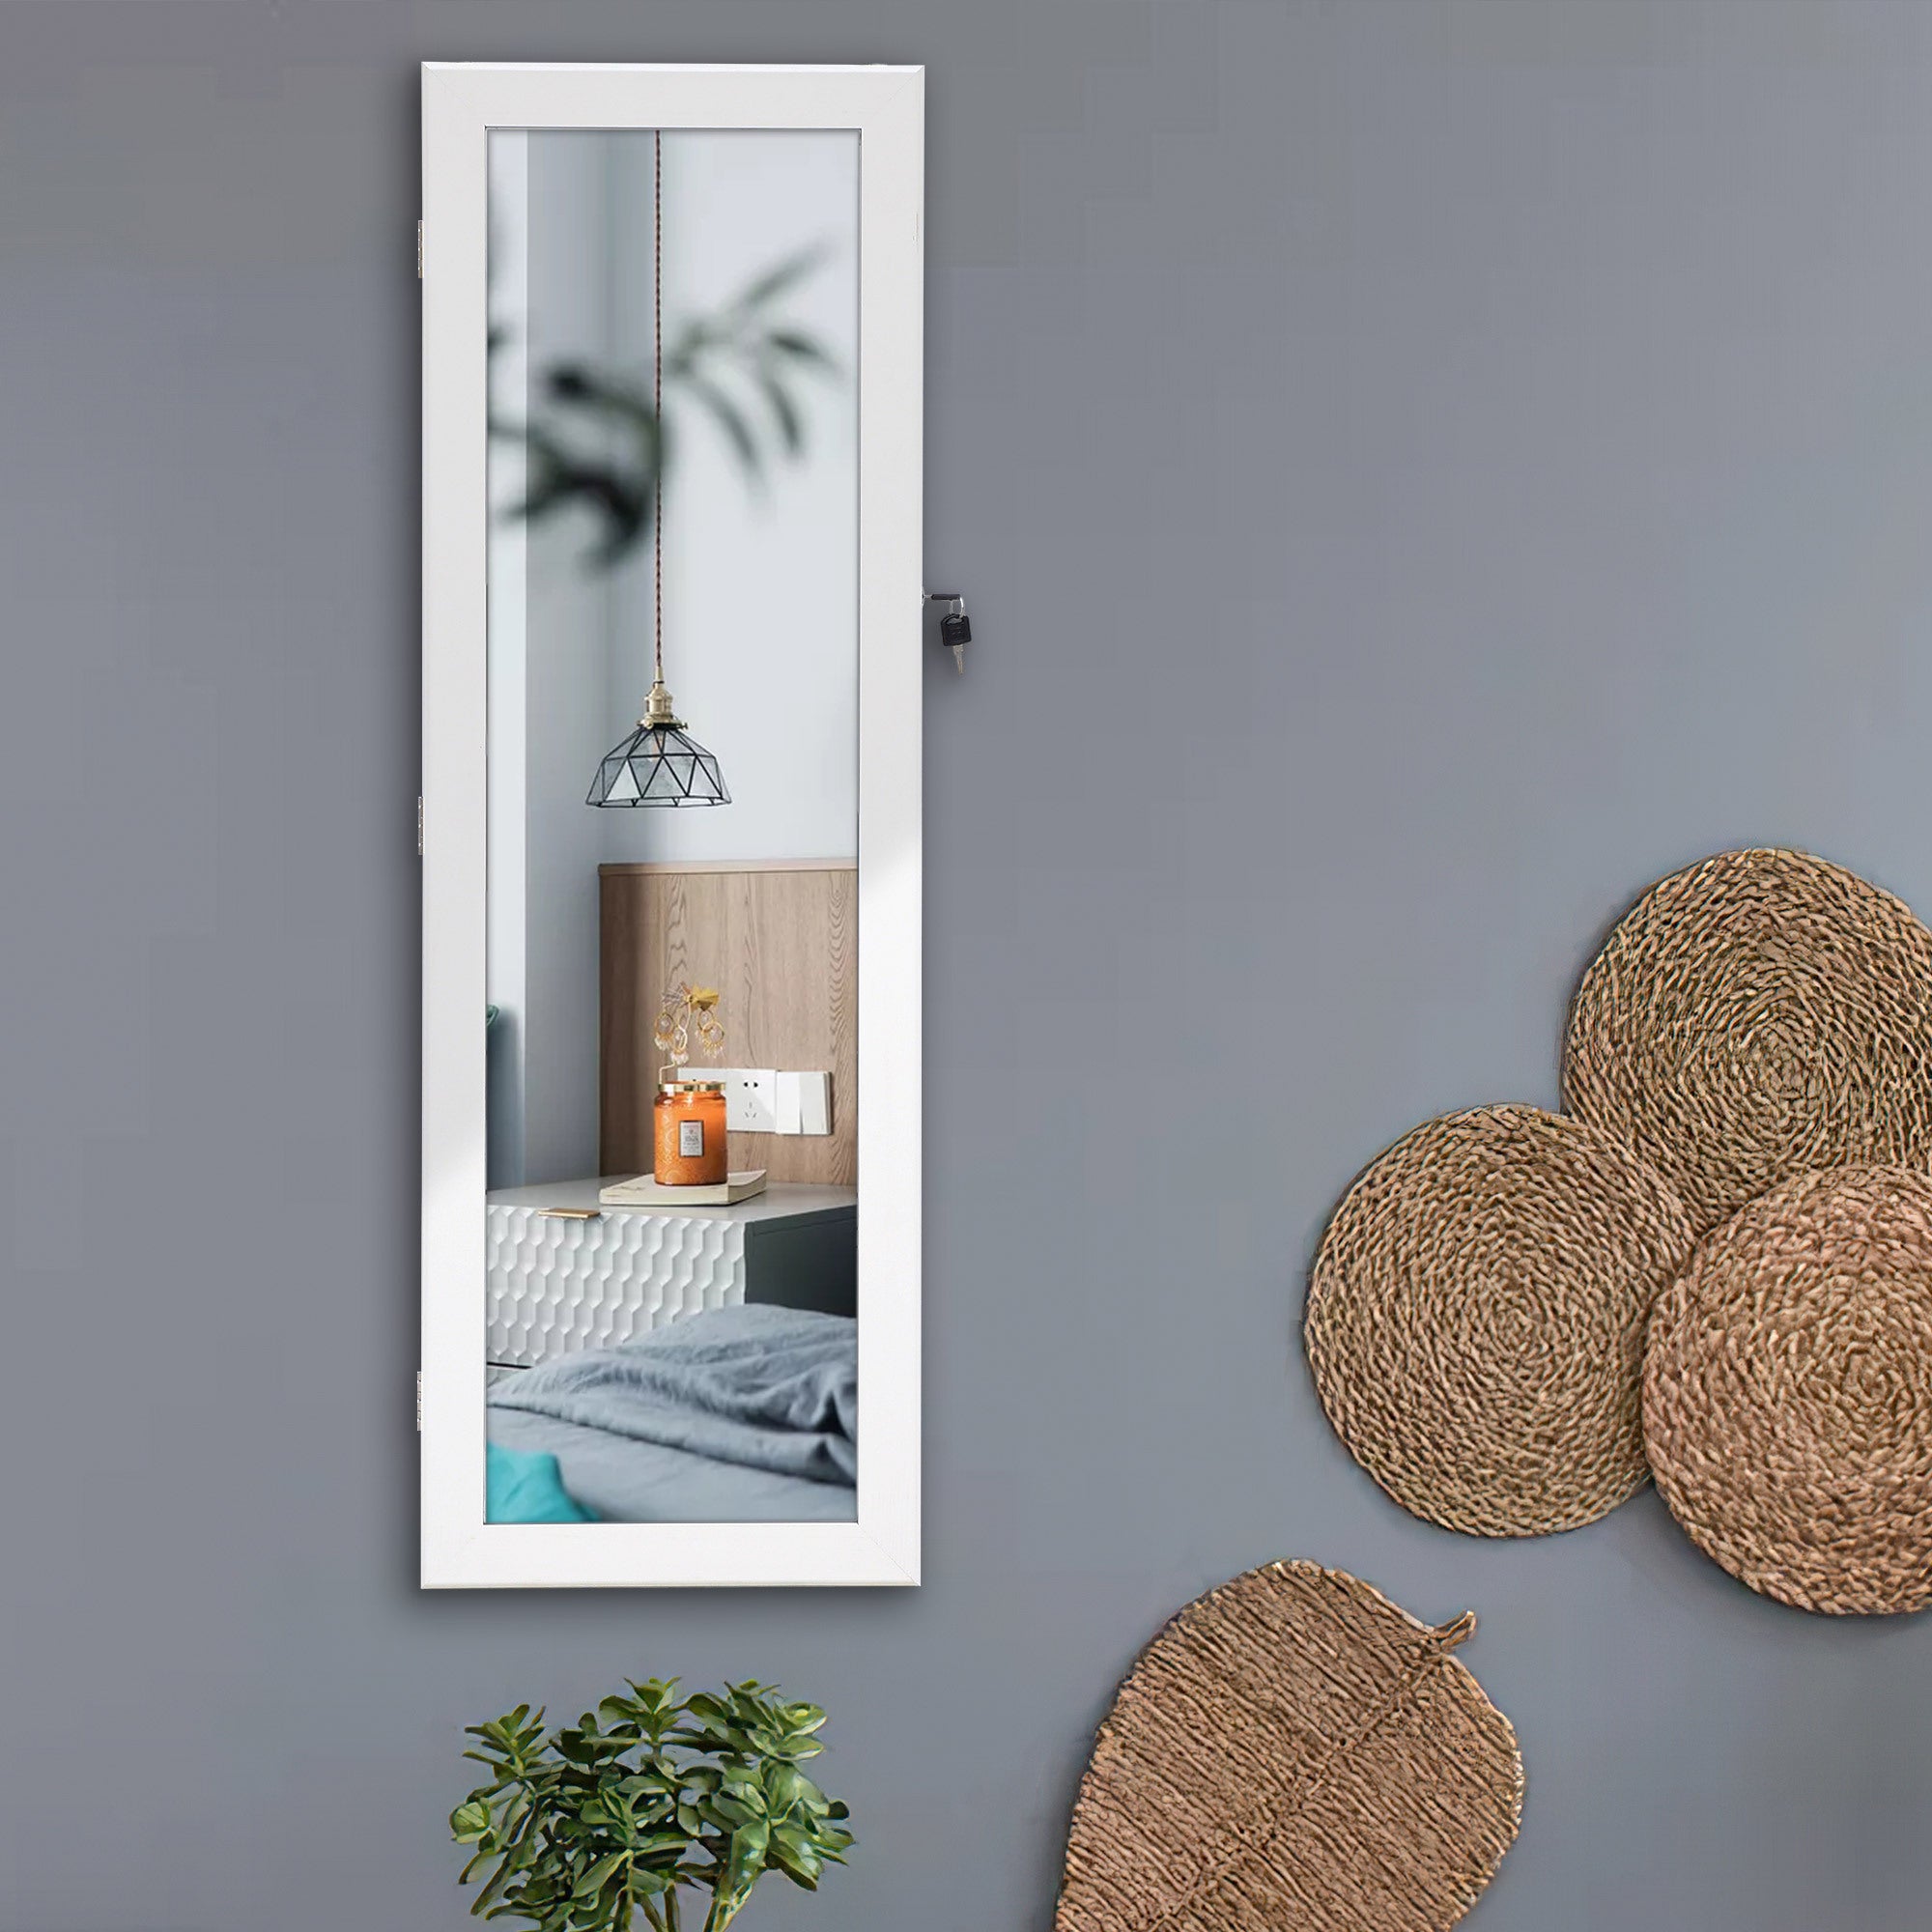 White Jewelry Storage Mirror Cabinet Can Be Hung On The Door Or Wall